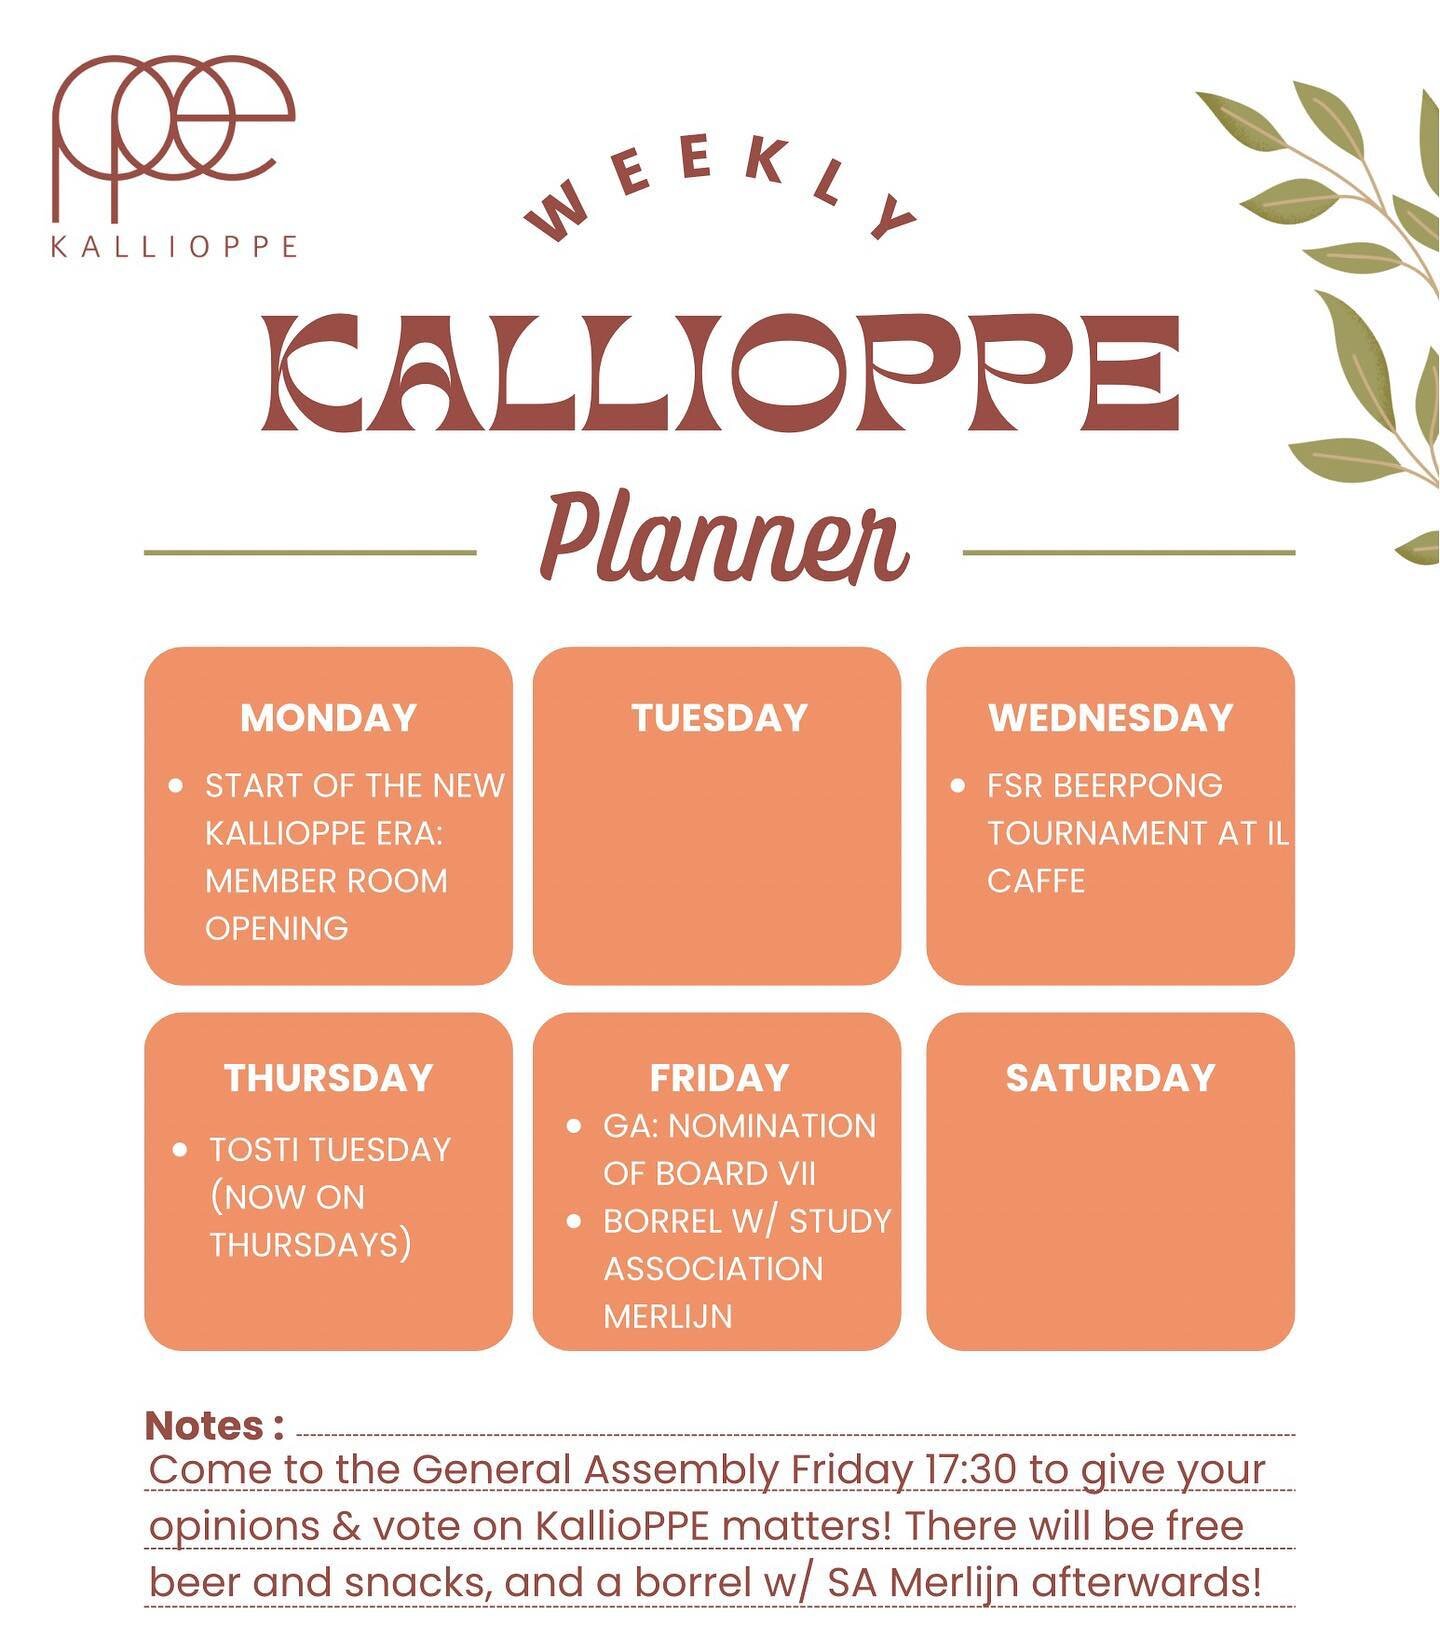 Monday 17th April: KallioPPE's New Era Begins

On Monday 17th at 12:45 you're going to want to be on the 4th floor to finally witness the start of the promised &quot;New KallioPPE Era&quot;. The Board, some other wonderful helpers and the Sustainabil